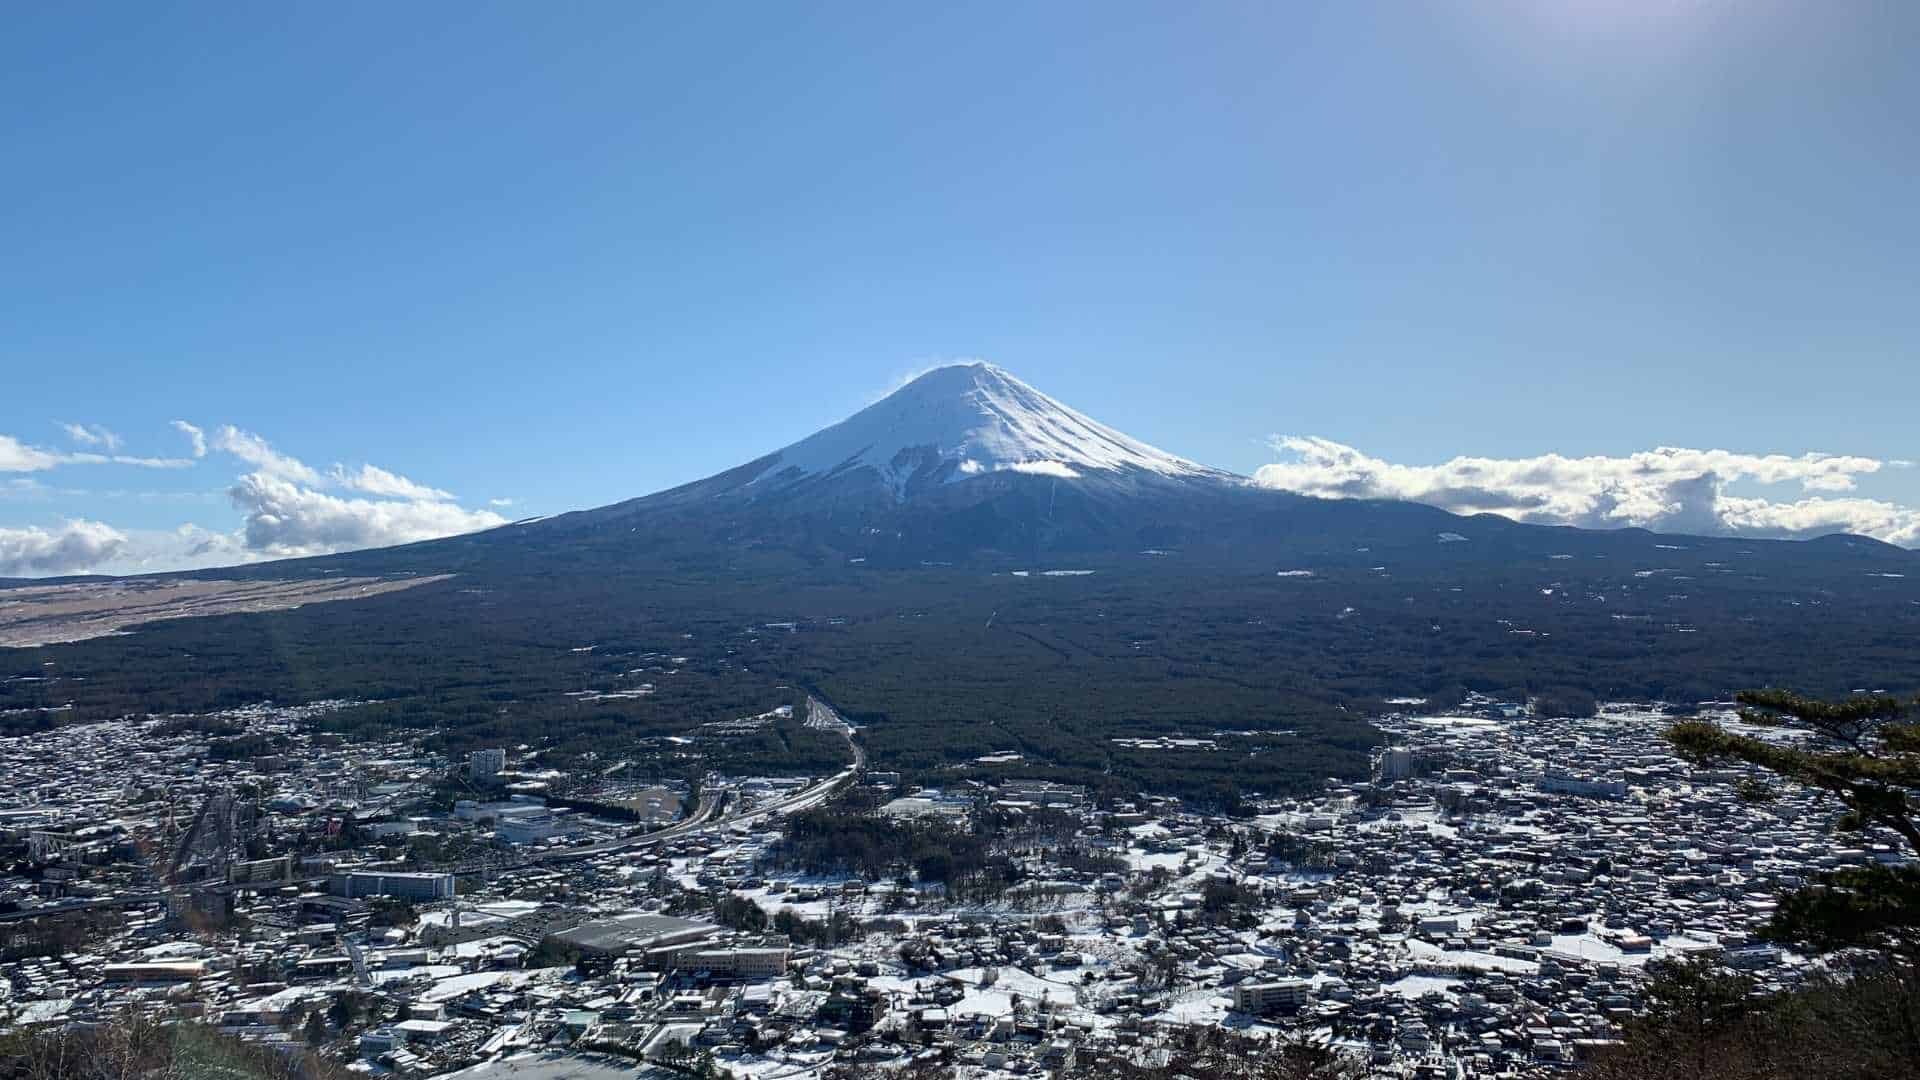 8 Best things to do in Mount Fuji and everything you need to know